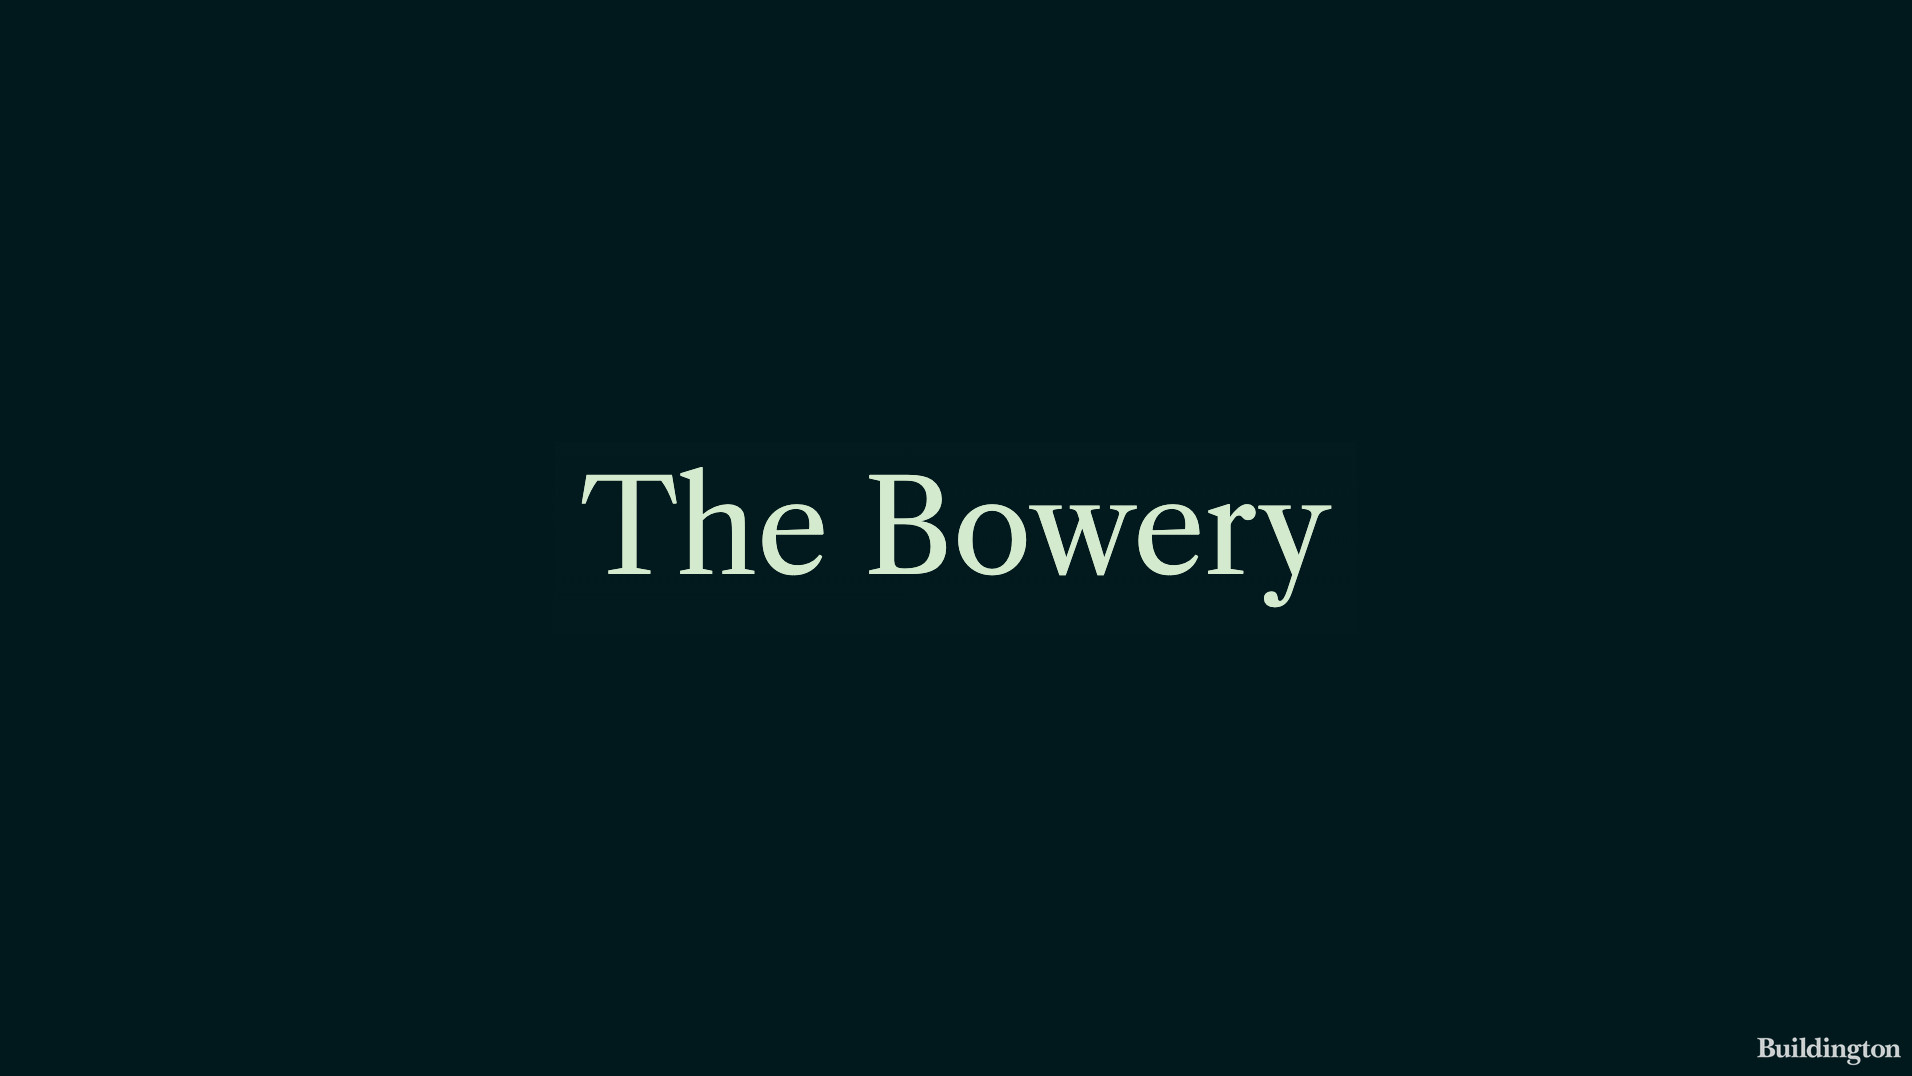 The Bowery development by Latimer homes